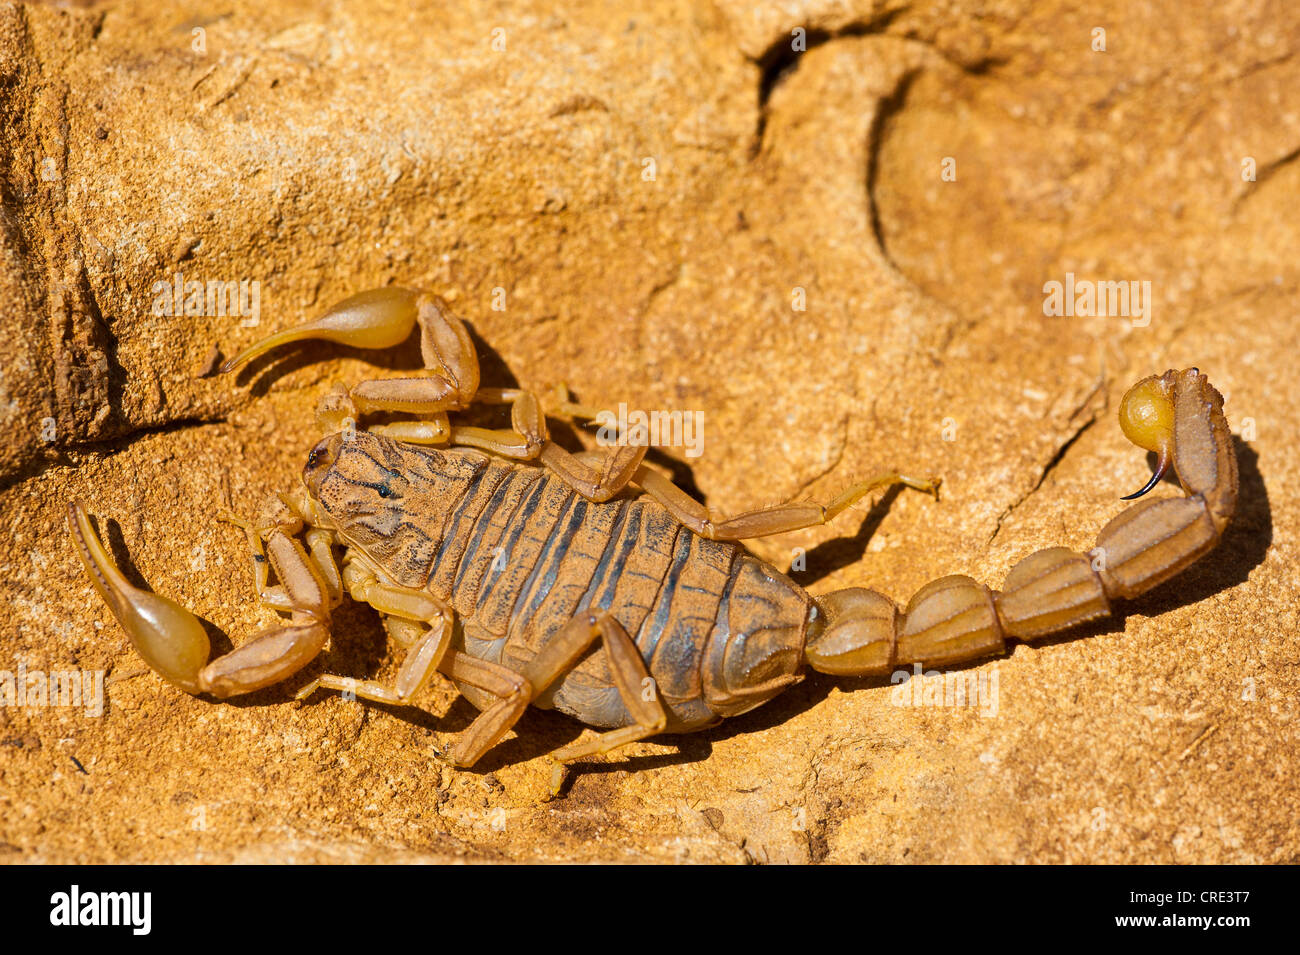 Field scorpion (Buthus occitanus) on a stone slab, Middle Atlas Mountains, Morocco, Africa Stock Photo